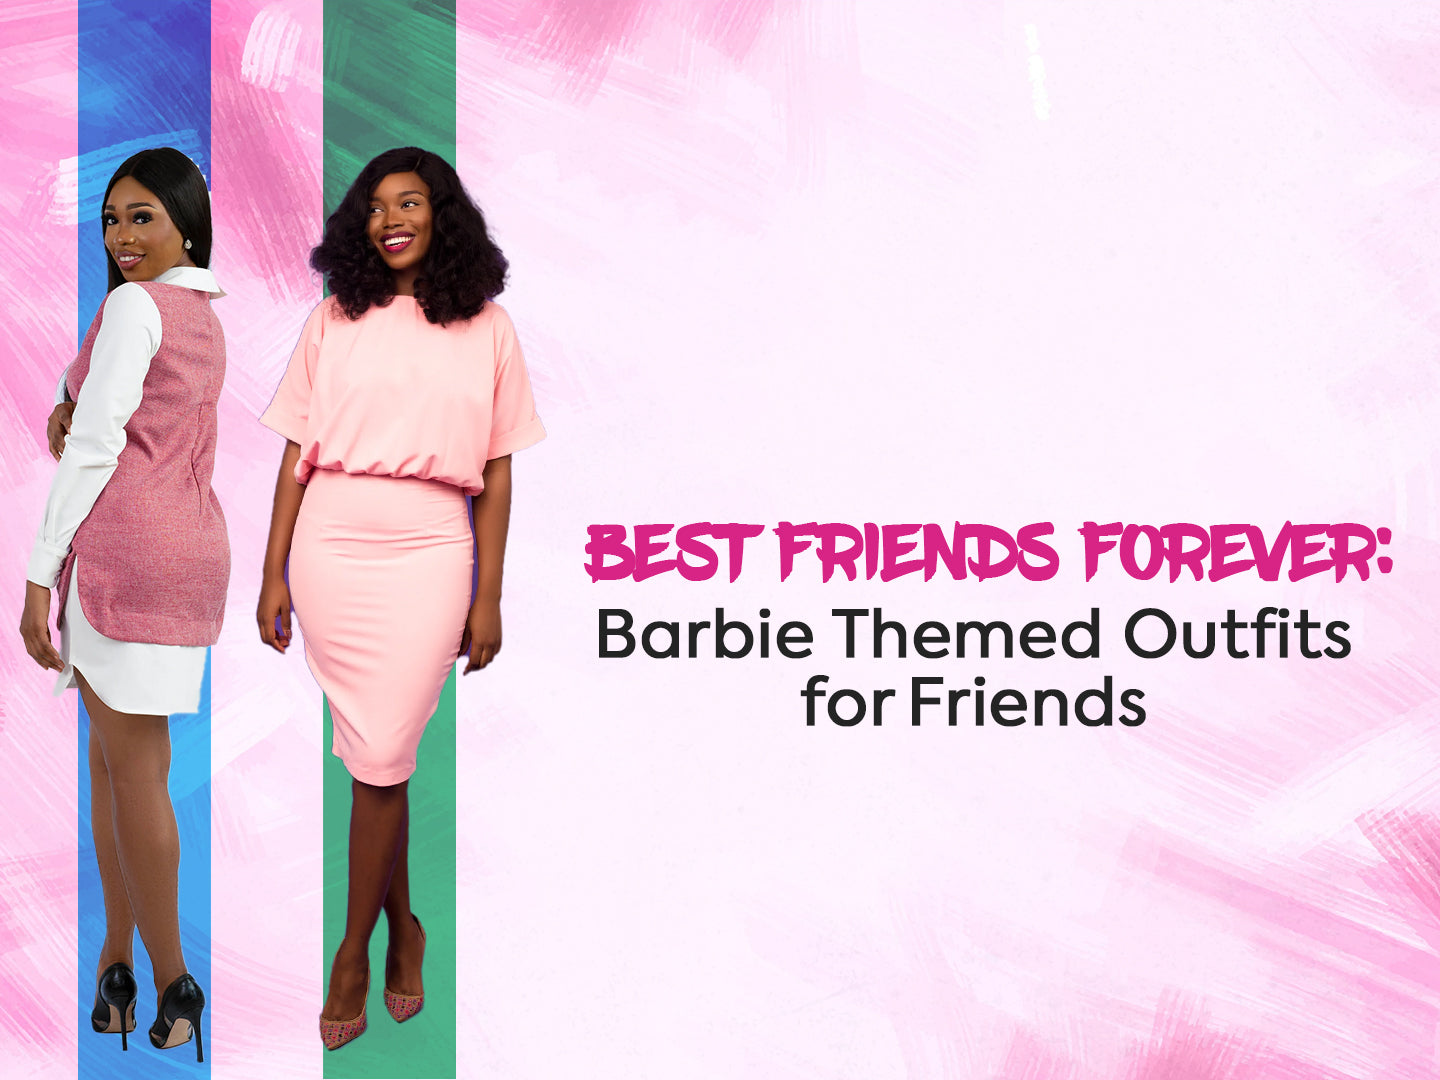 Women's Fashion Trends - Barbie Themed Outfits For Friends